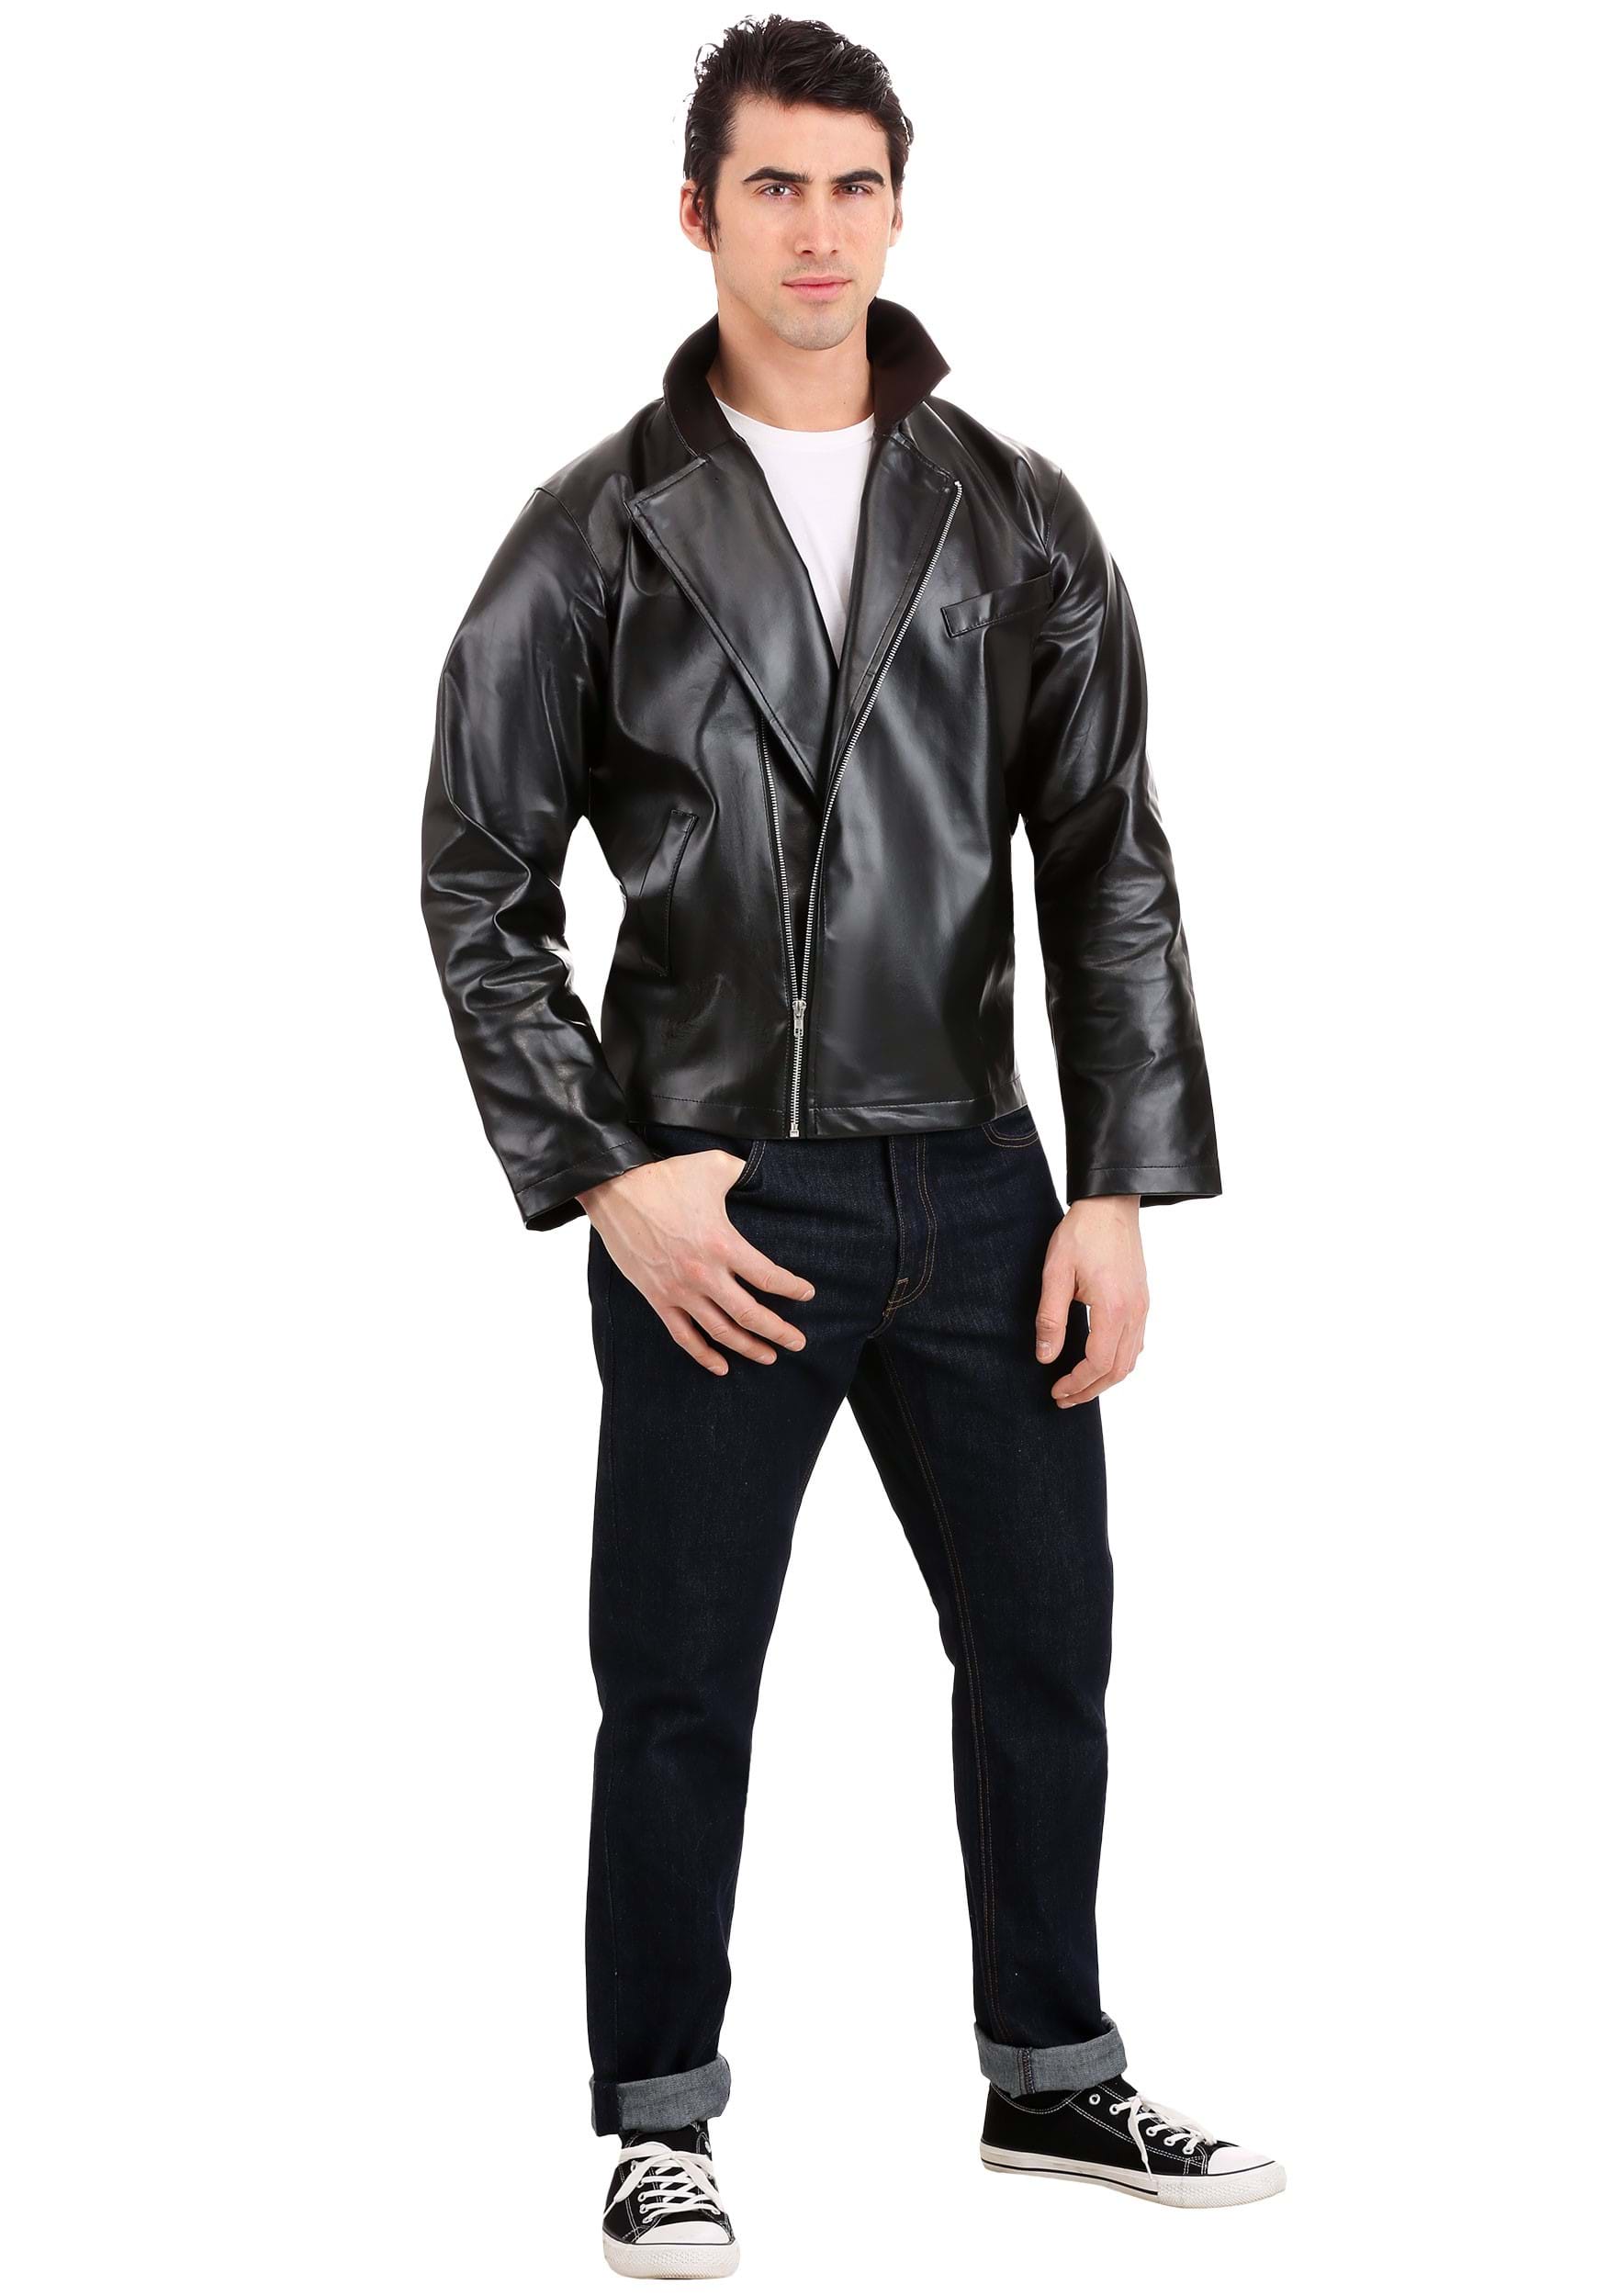 Image of Grease T-Birds Jacket  Plus Size Costume ID GRE6007PL-2X